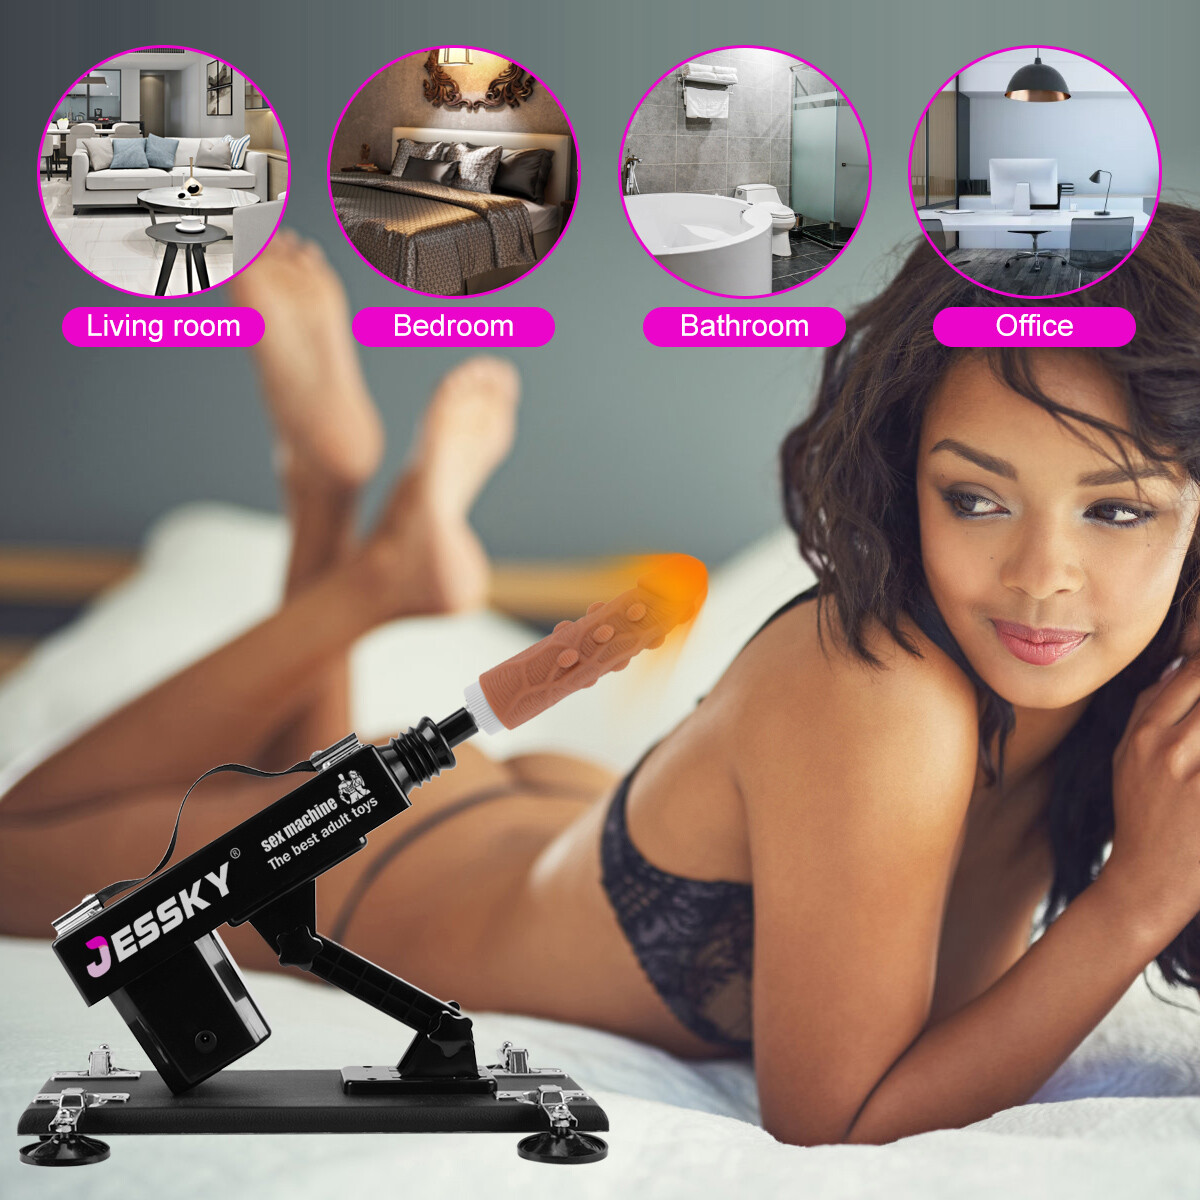 Female Automatic Sex Machine With Bluetooth Photograph And Video Swept The World Female Masturbation